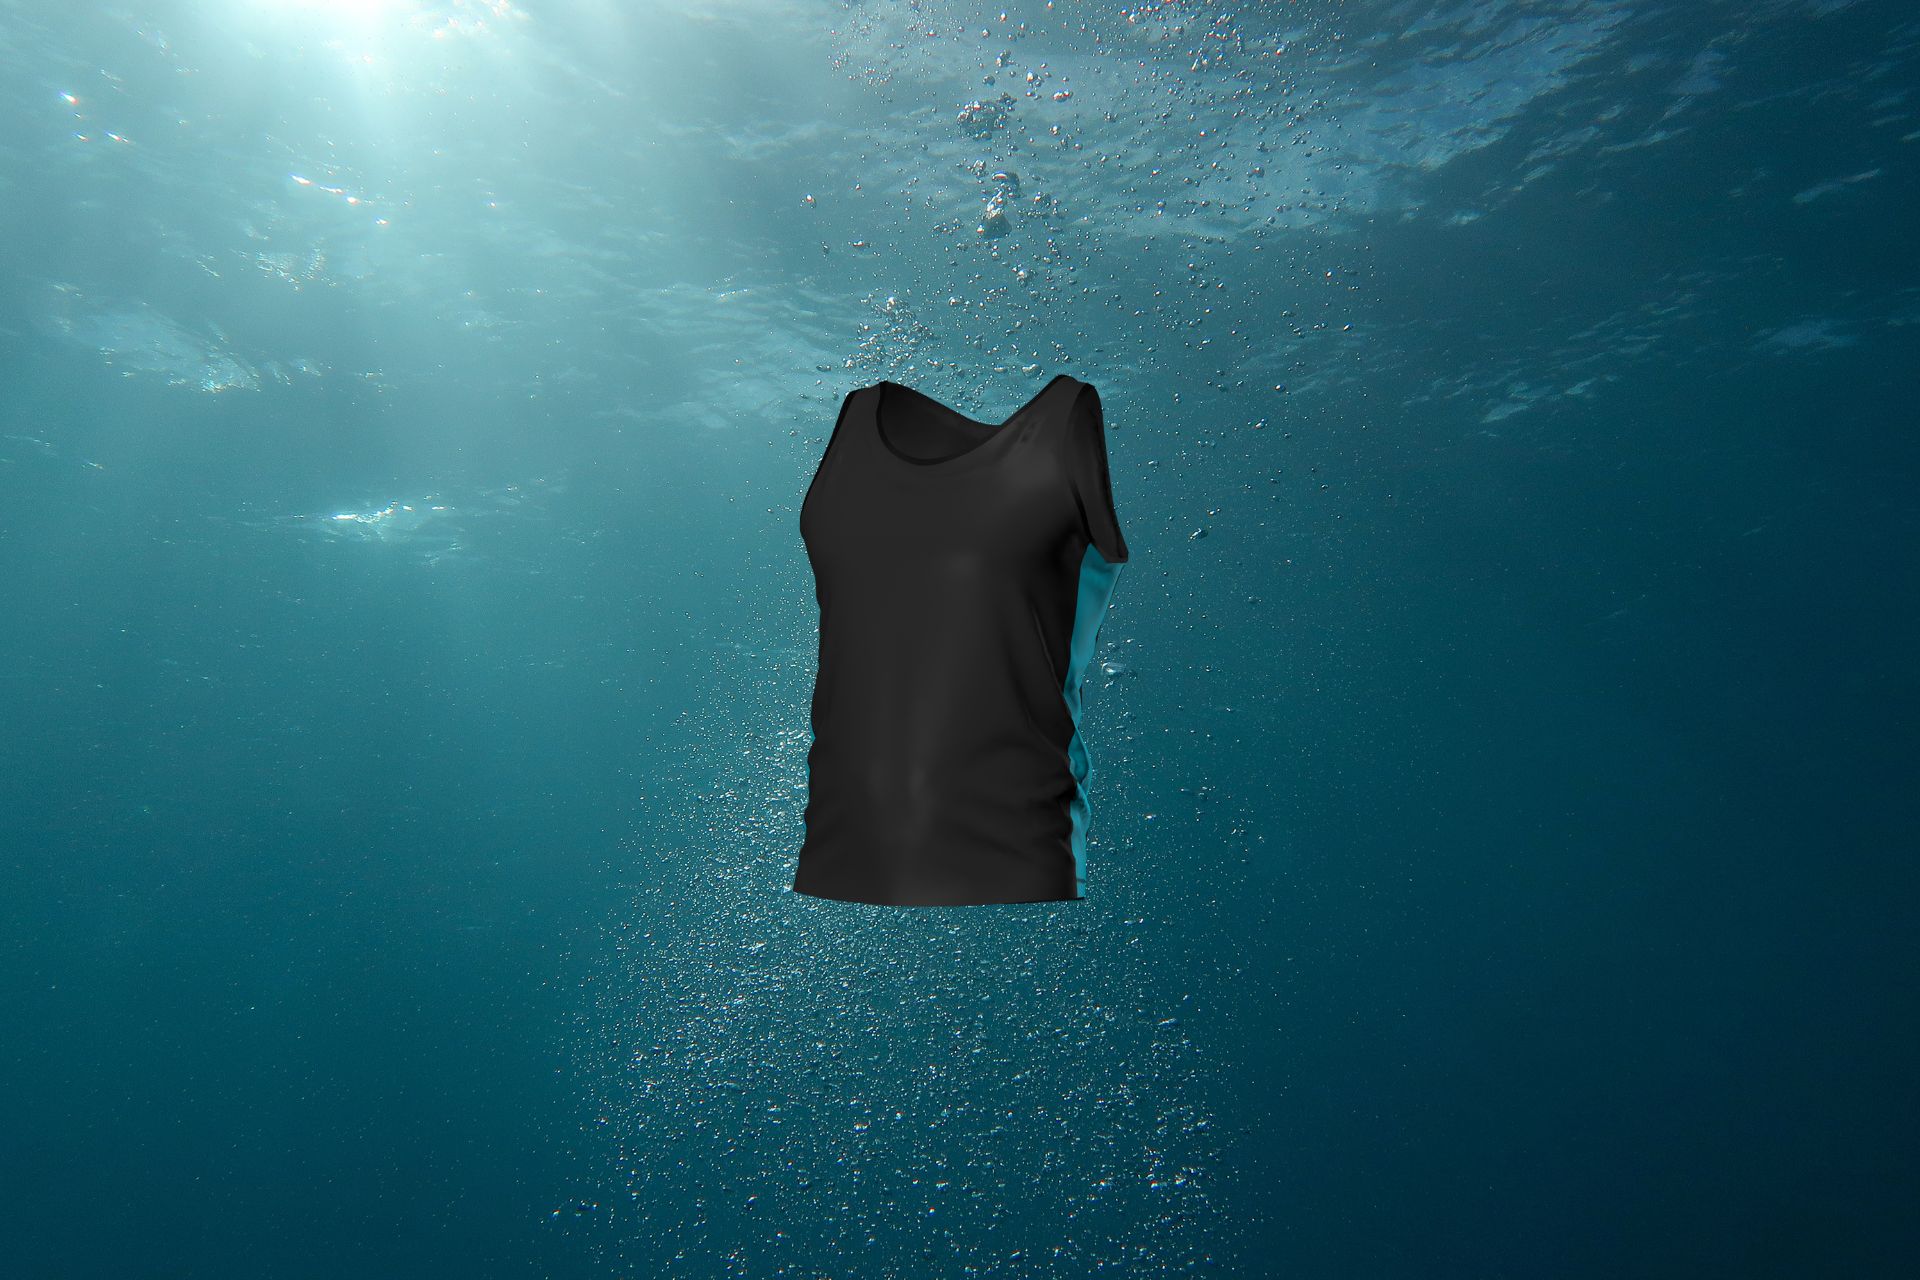 3D imagery of the TOMSCOUT SAPPHIRE swimming chest binder underwater, showcasing its adaptability and resilience in the ocean.